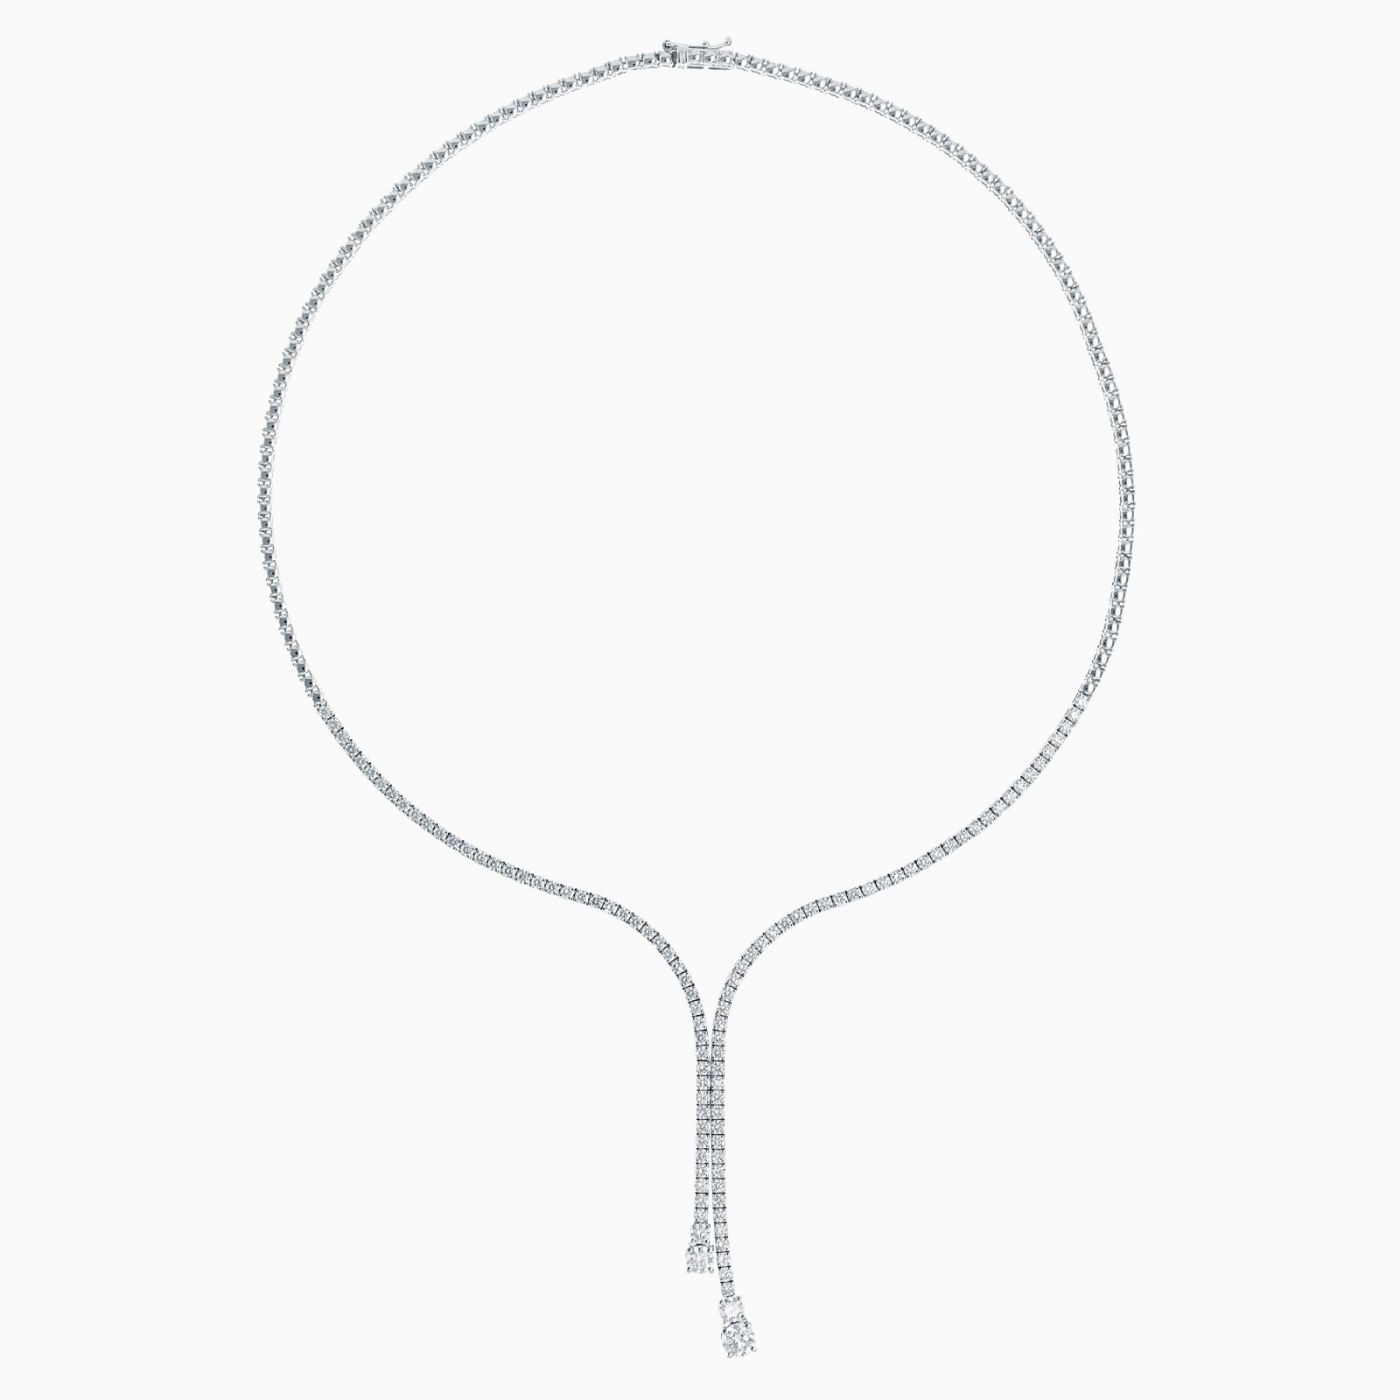 White gold riviere tie style necklace with diamonds